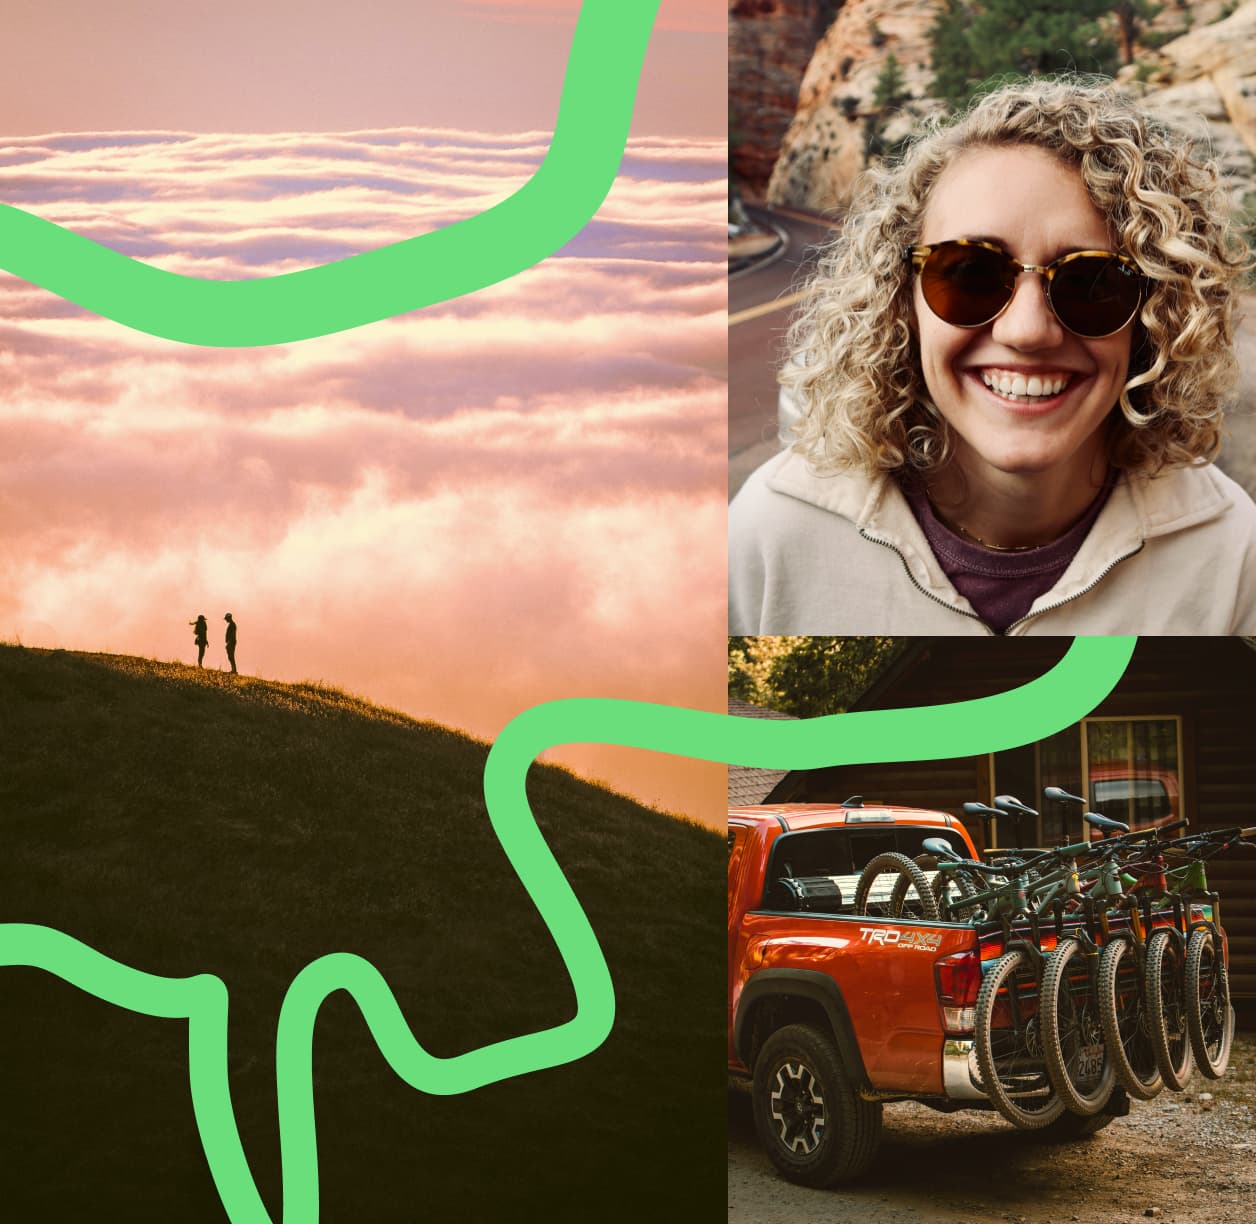 Three images depicting two people on a hill, a person smiling, and bikes on the back of a truck